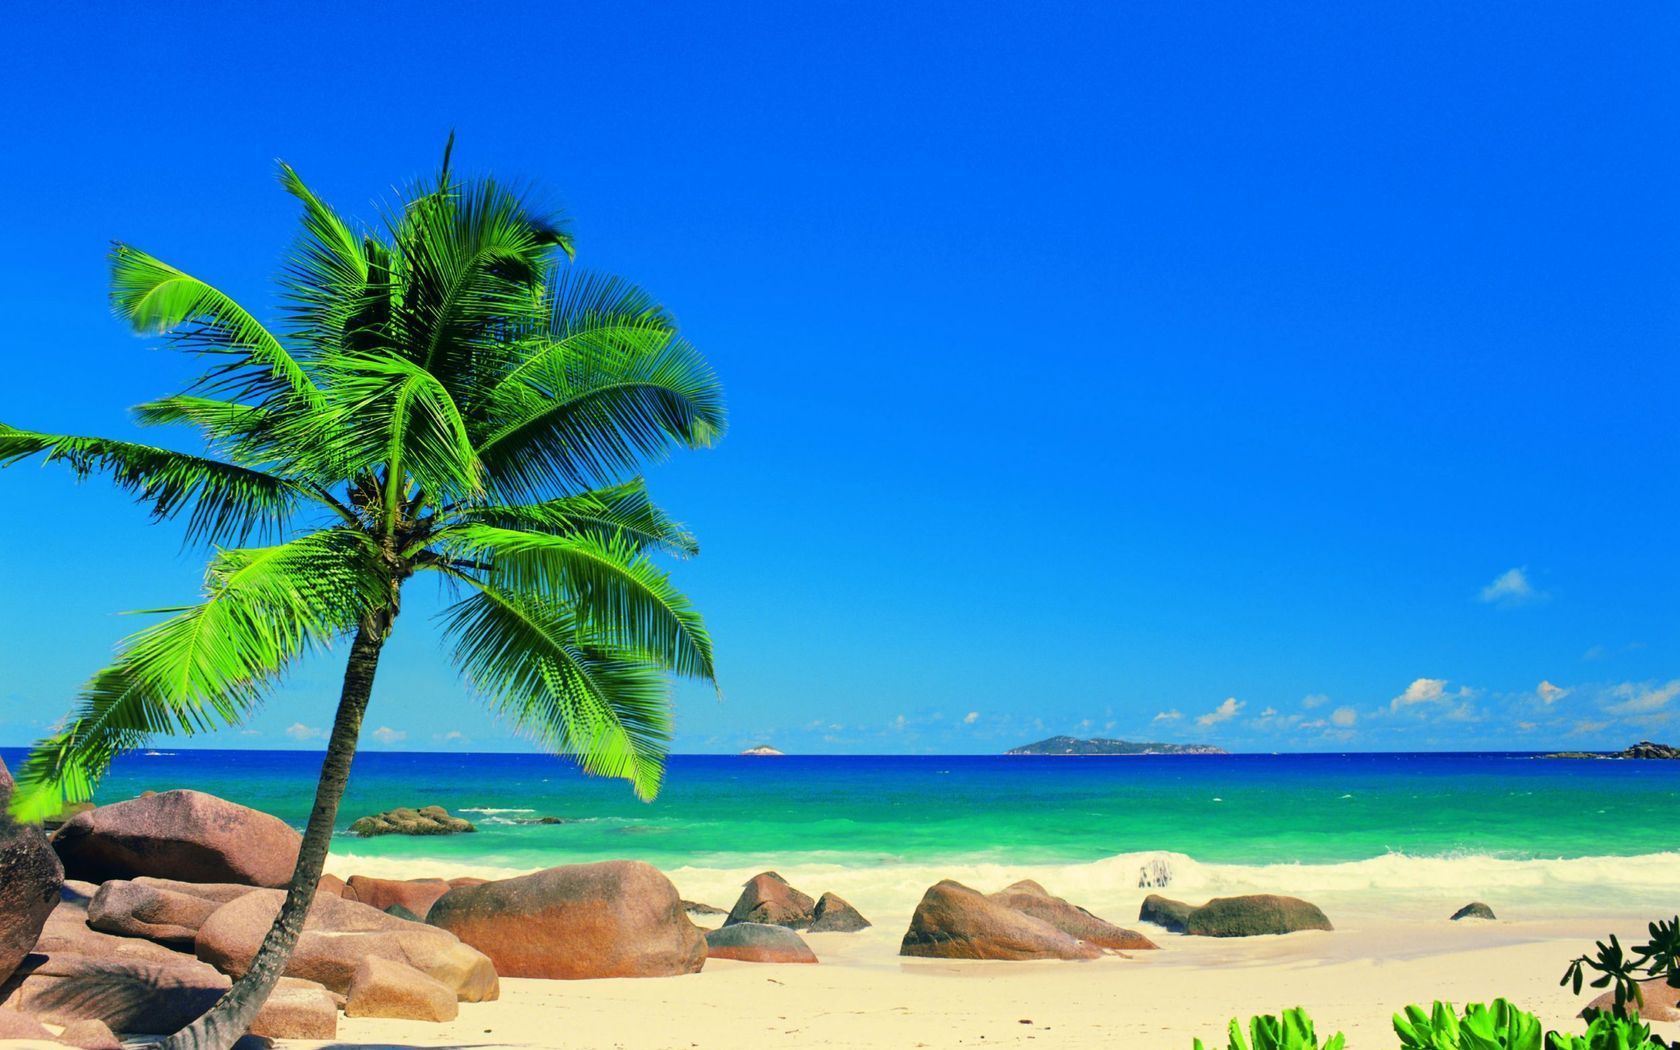 Gallery for - wallpaper of palm trees and beaches